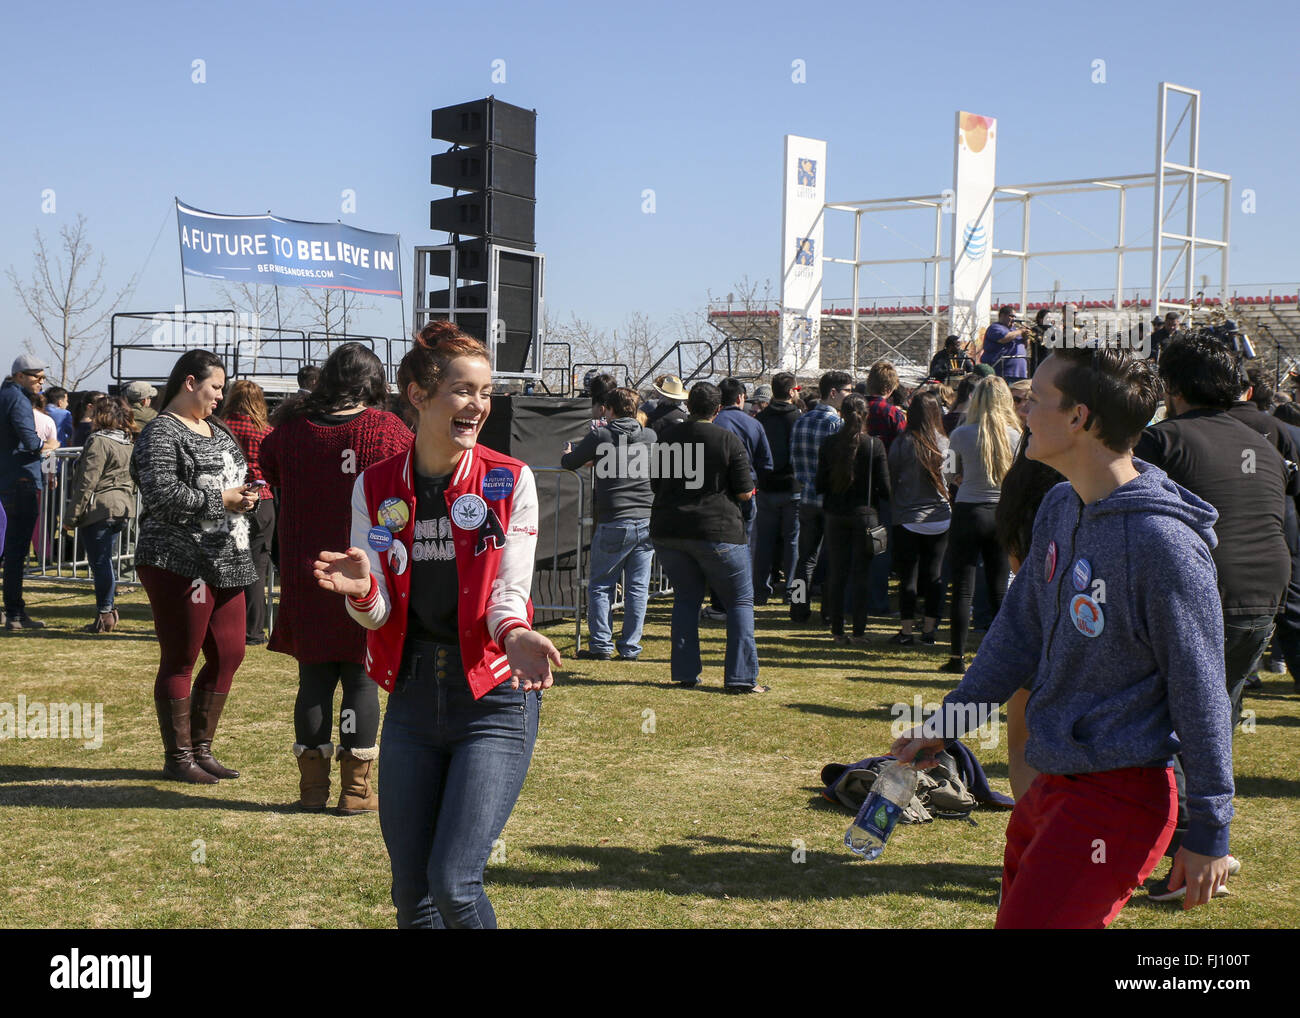 Austin, Texas, USA. 27th Feb, 2016. Supporters of Democratic Presidential candidate Bernie Sanders enjoy the performance of Austin's GRUPO FANTASMA before the candidate was due to speak at a campaign rally just outside Austin, Texas. Credit:  Scott W. Coleman/ZUMA Wire/Alamy Live News Stock Photo